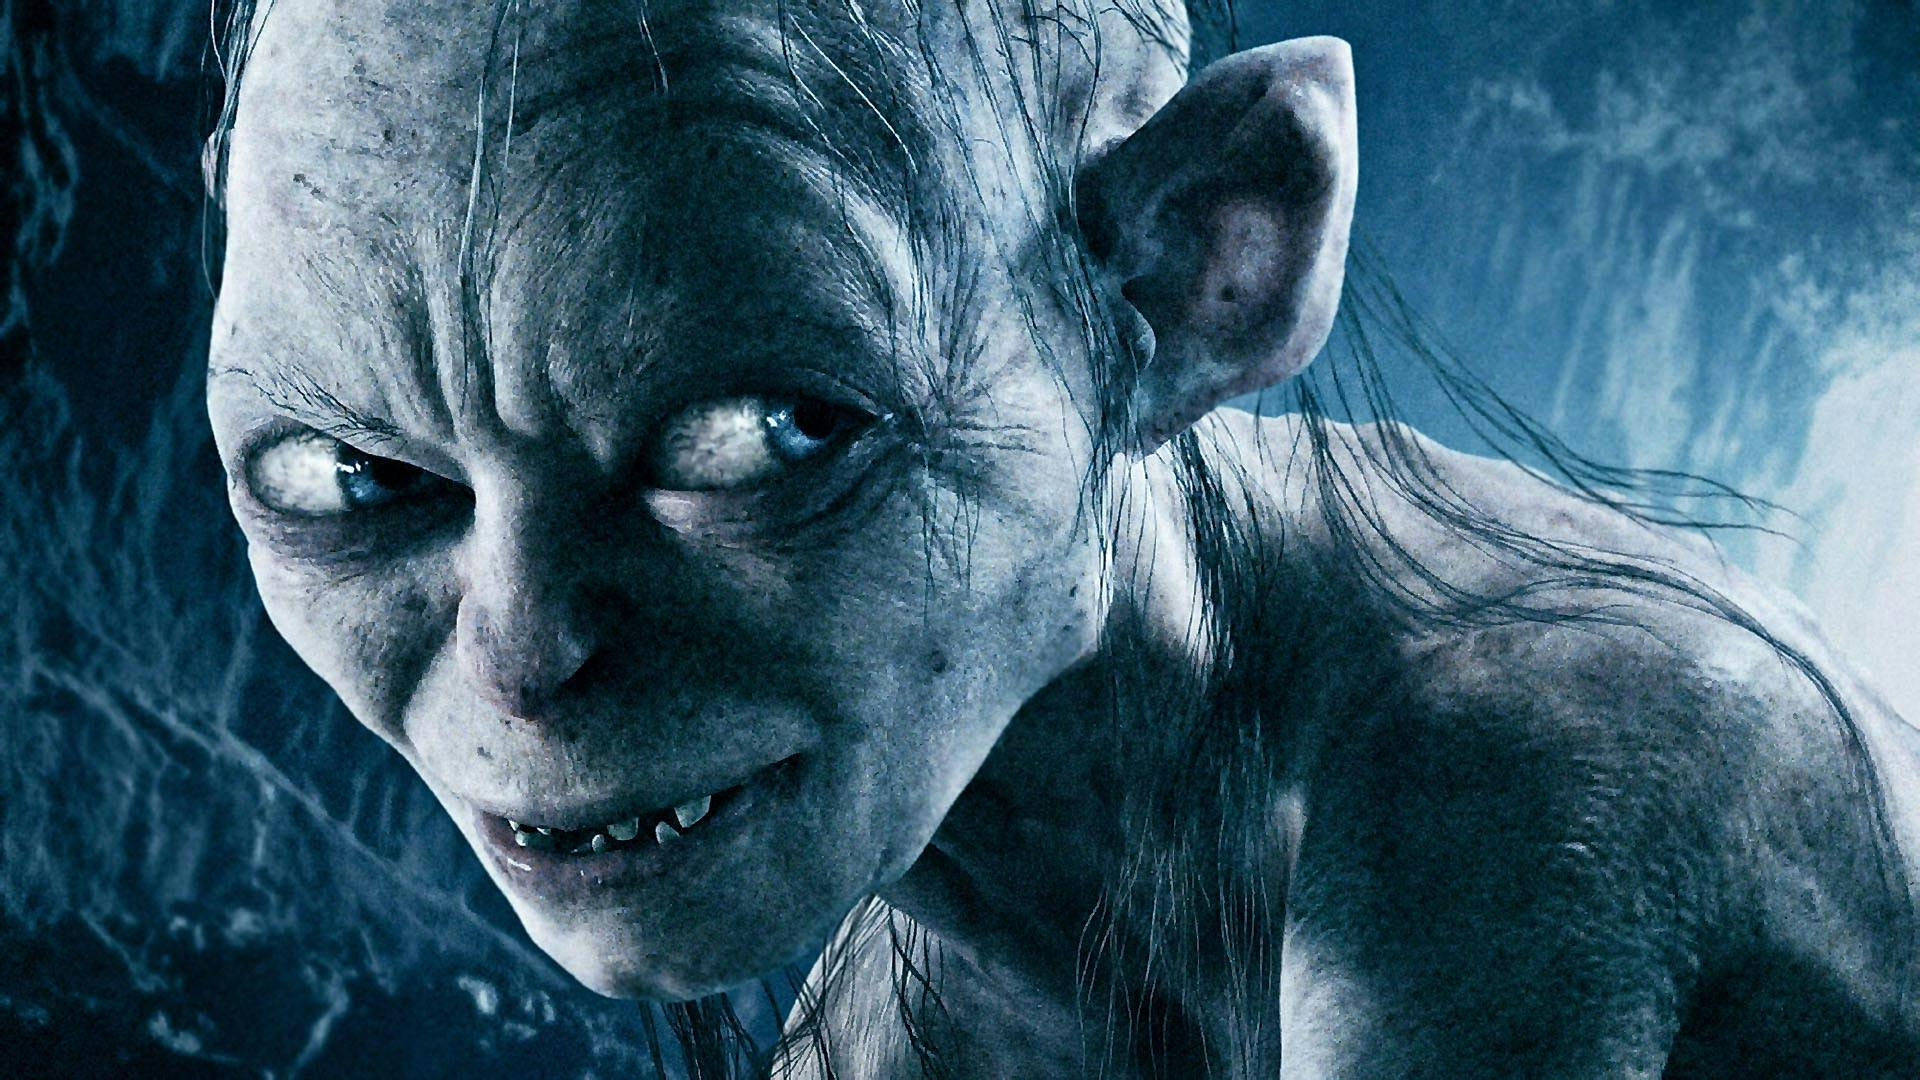 7 Lord Of The Rings Stories Warner Bros' New Movies Might Be About